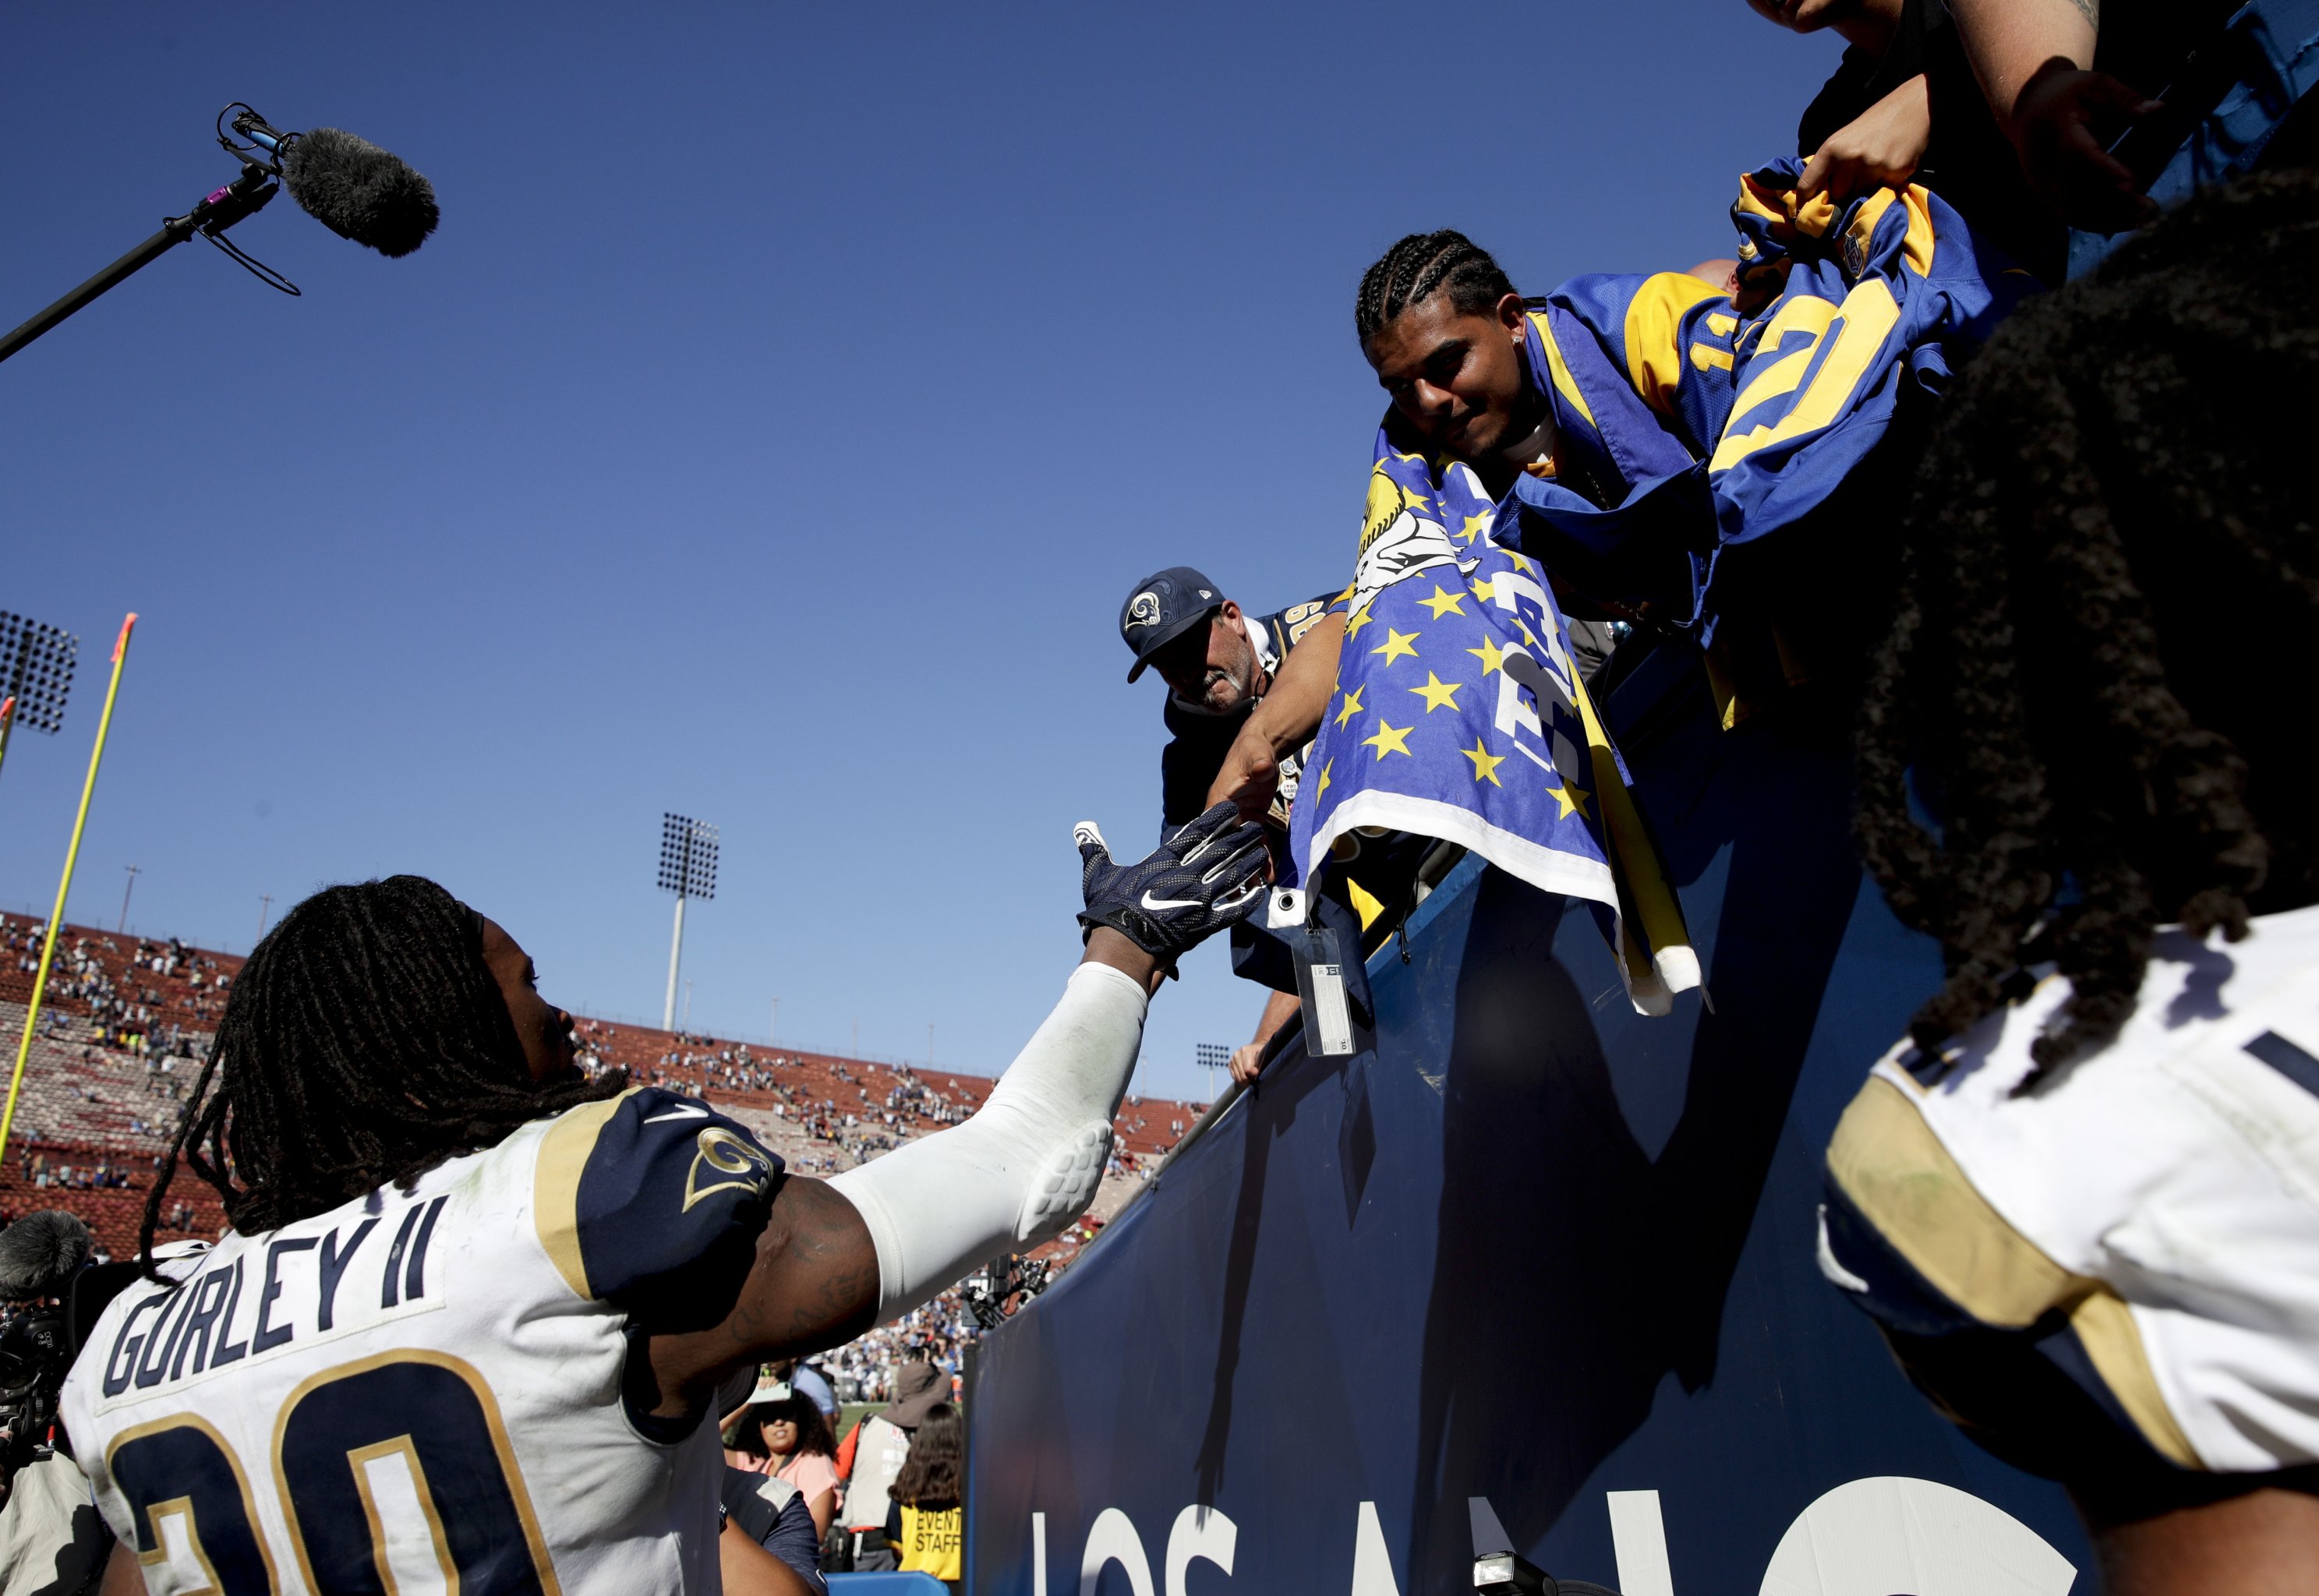 The one flaw in the Rams' otherwise perfect throwback uniforms